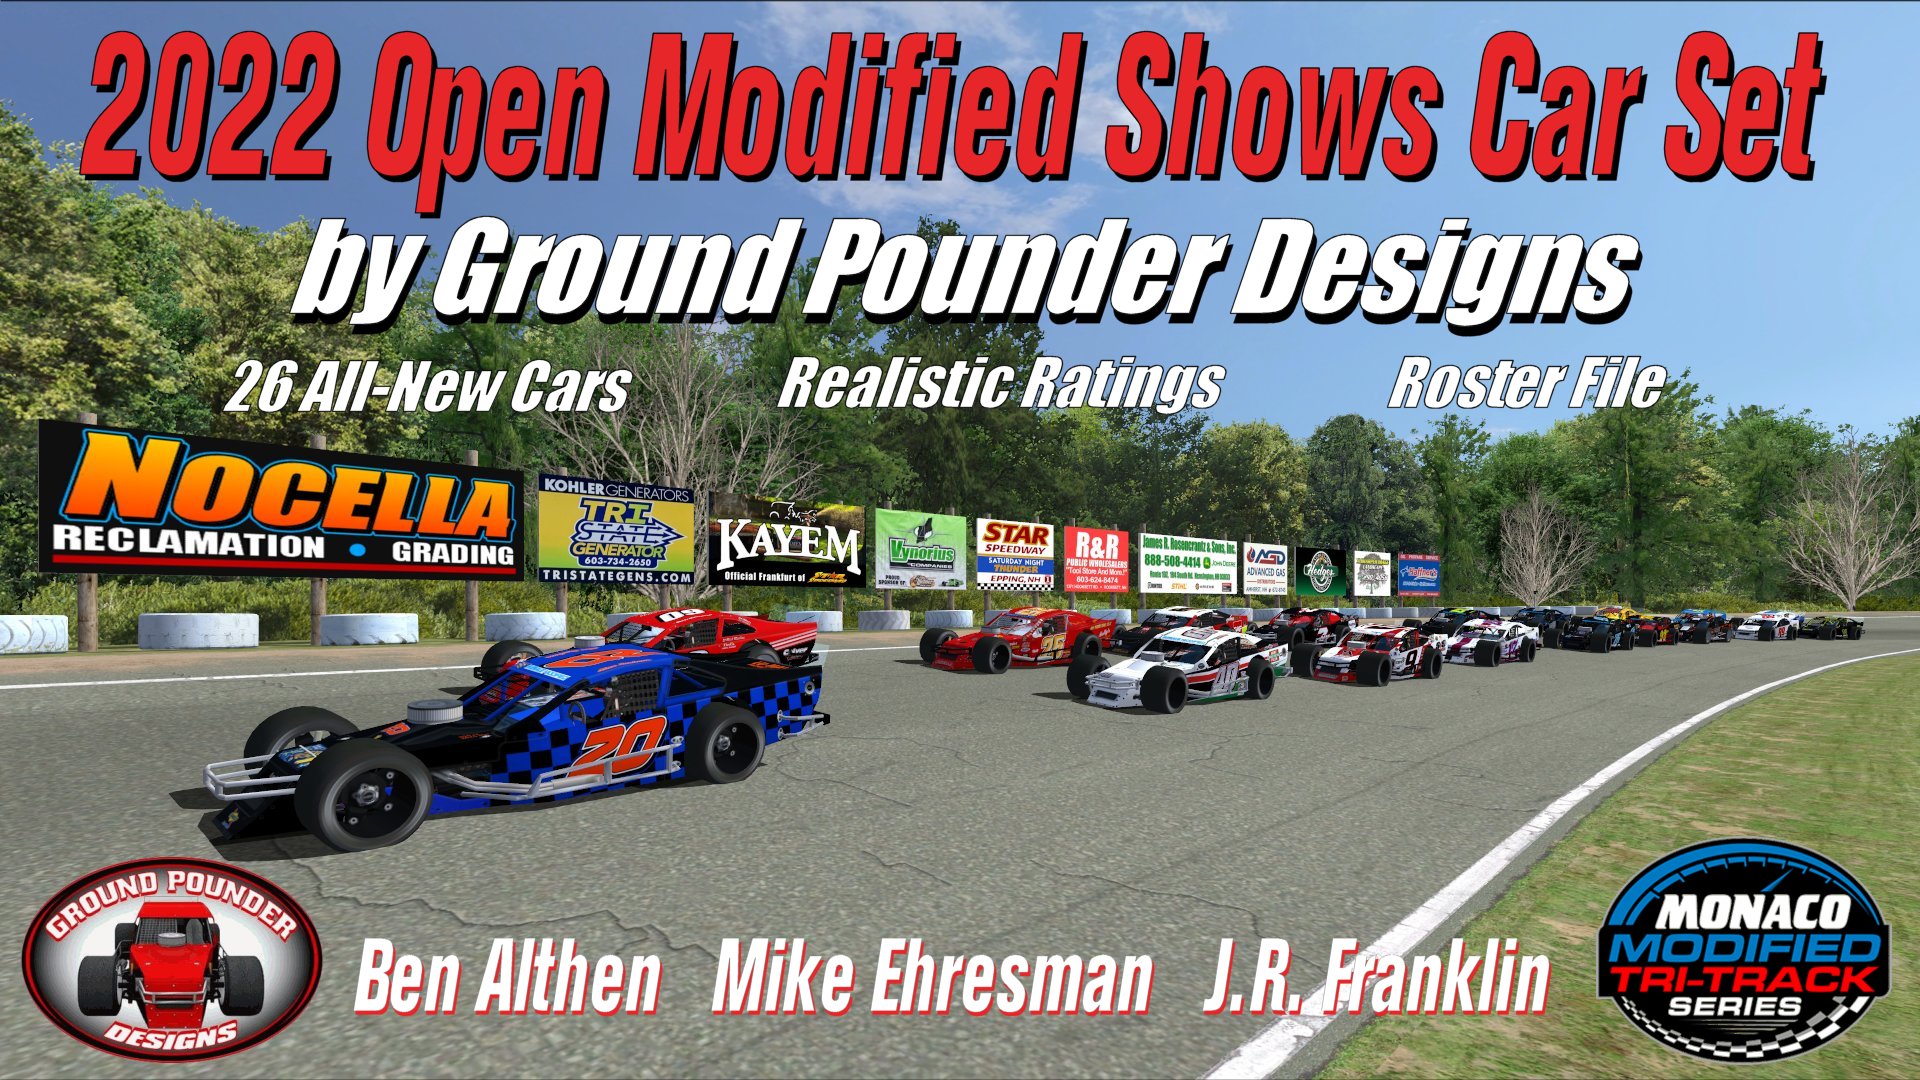 2022 OPEN Modified Shows Carset GPD.jpg